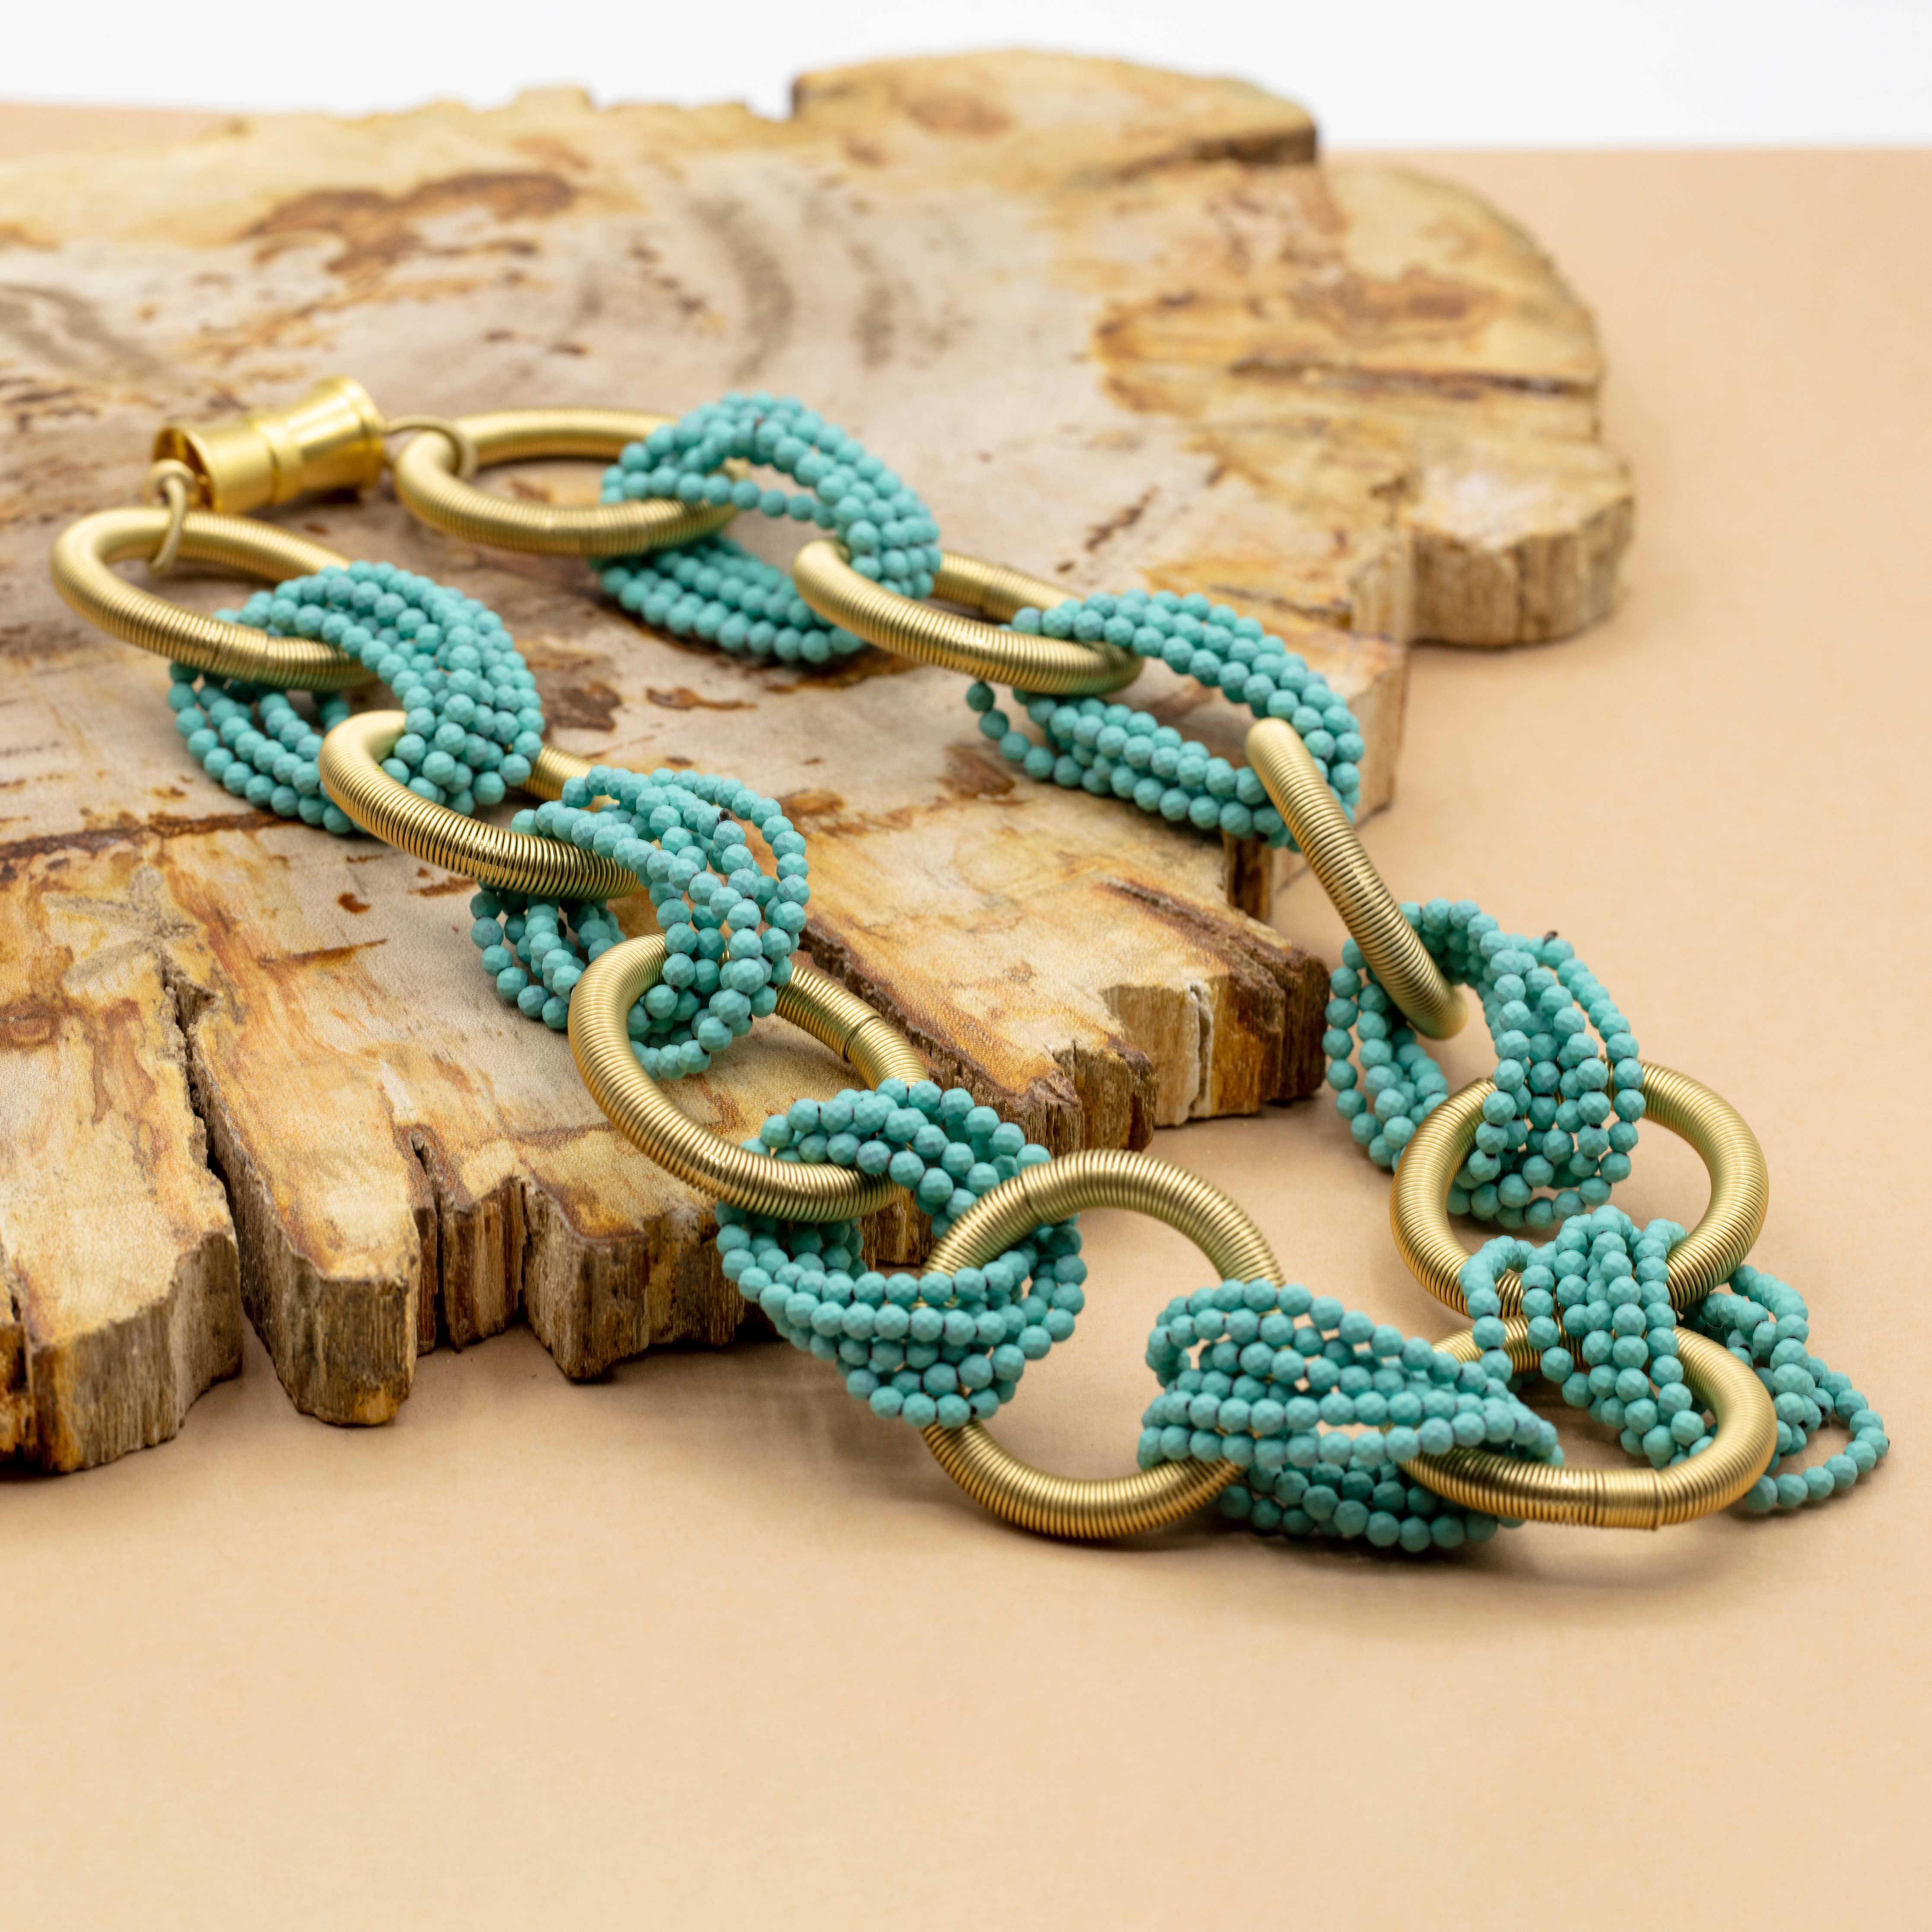 Sea Lily - Gold rings with connecting turquoise hematite beads necklace